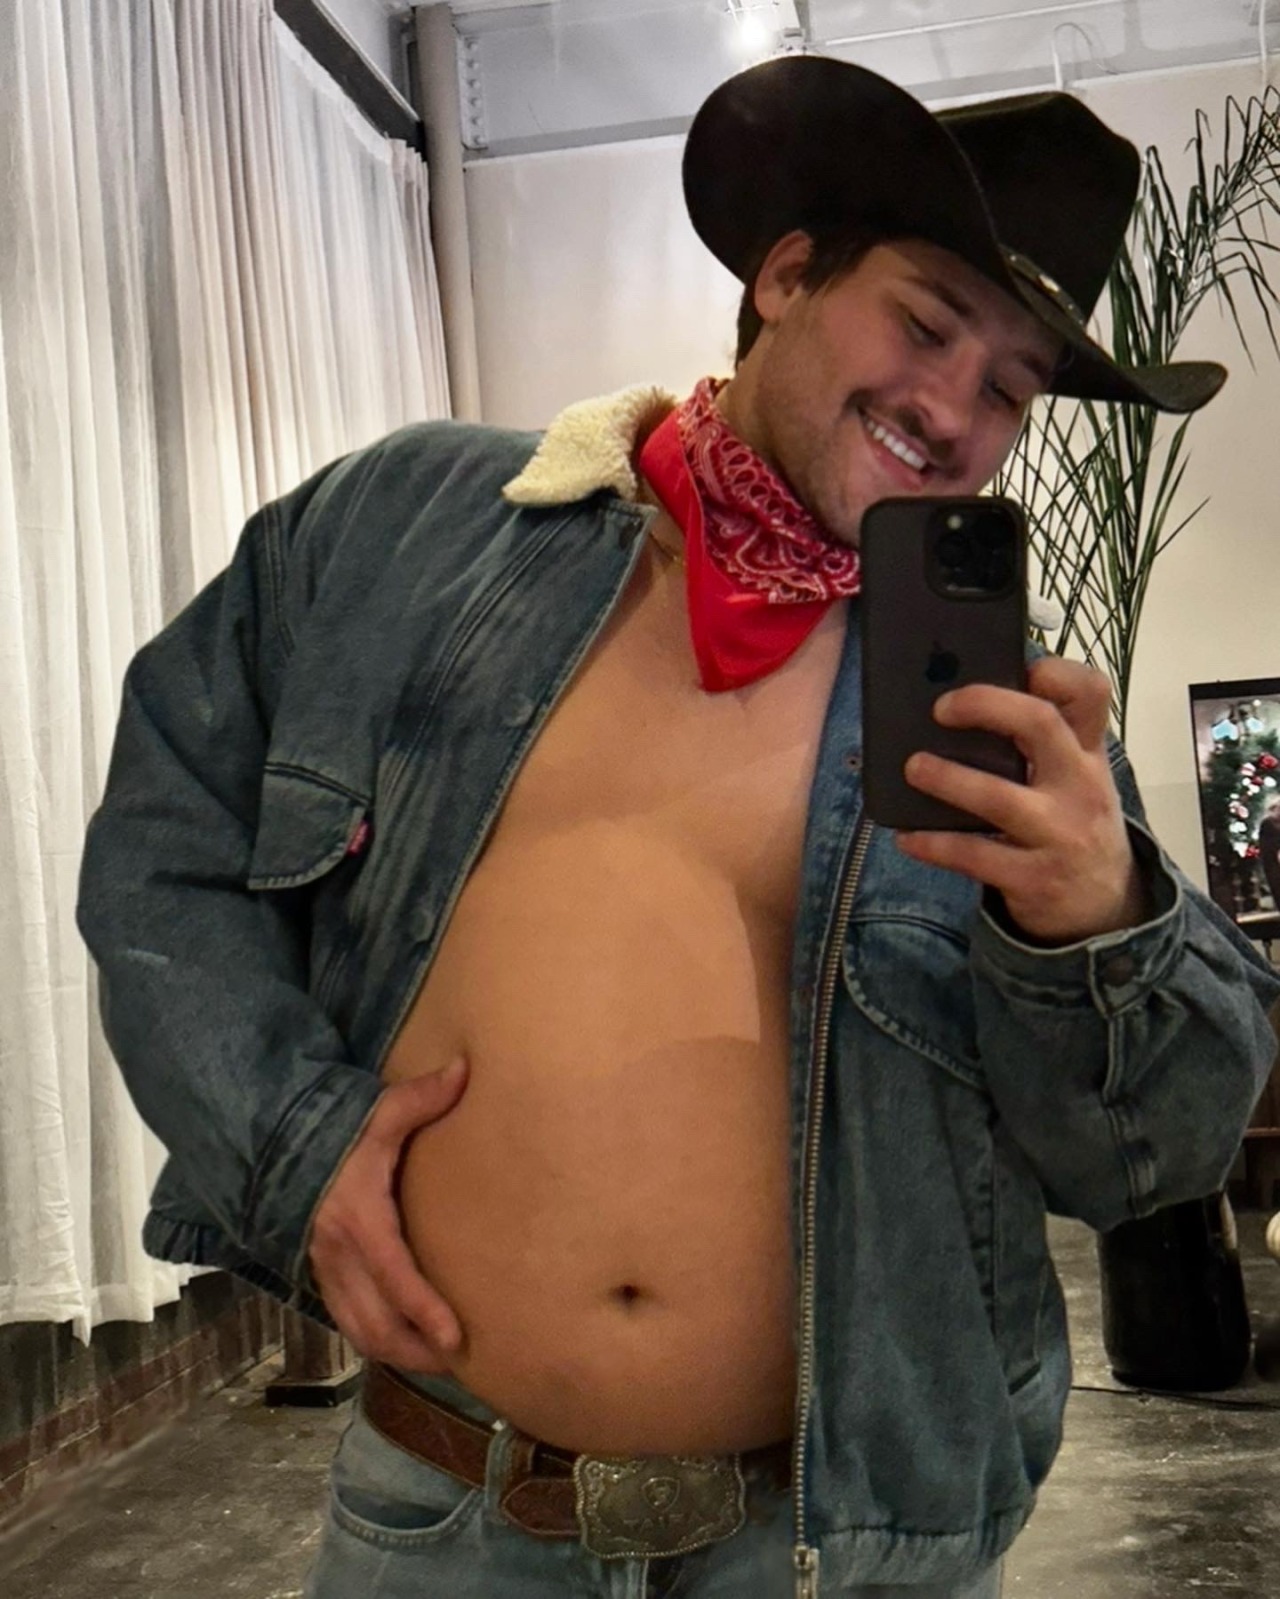 thic-as-thieves:A little late, but some pics from Halloween for y’all 🤠 link in bio for belly play video/pants try on! And lotsss more to come 😈